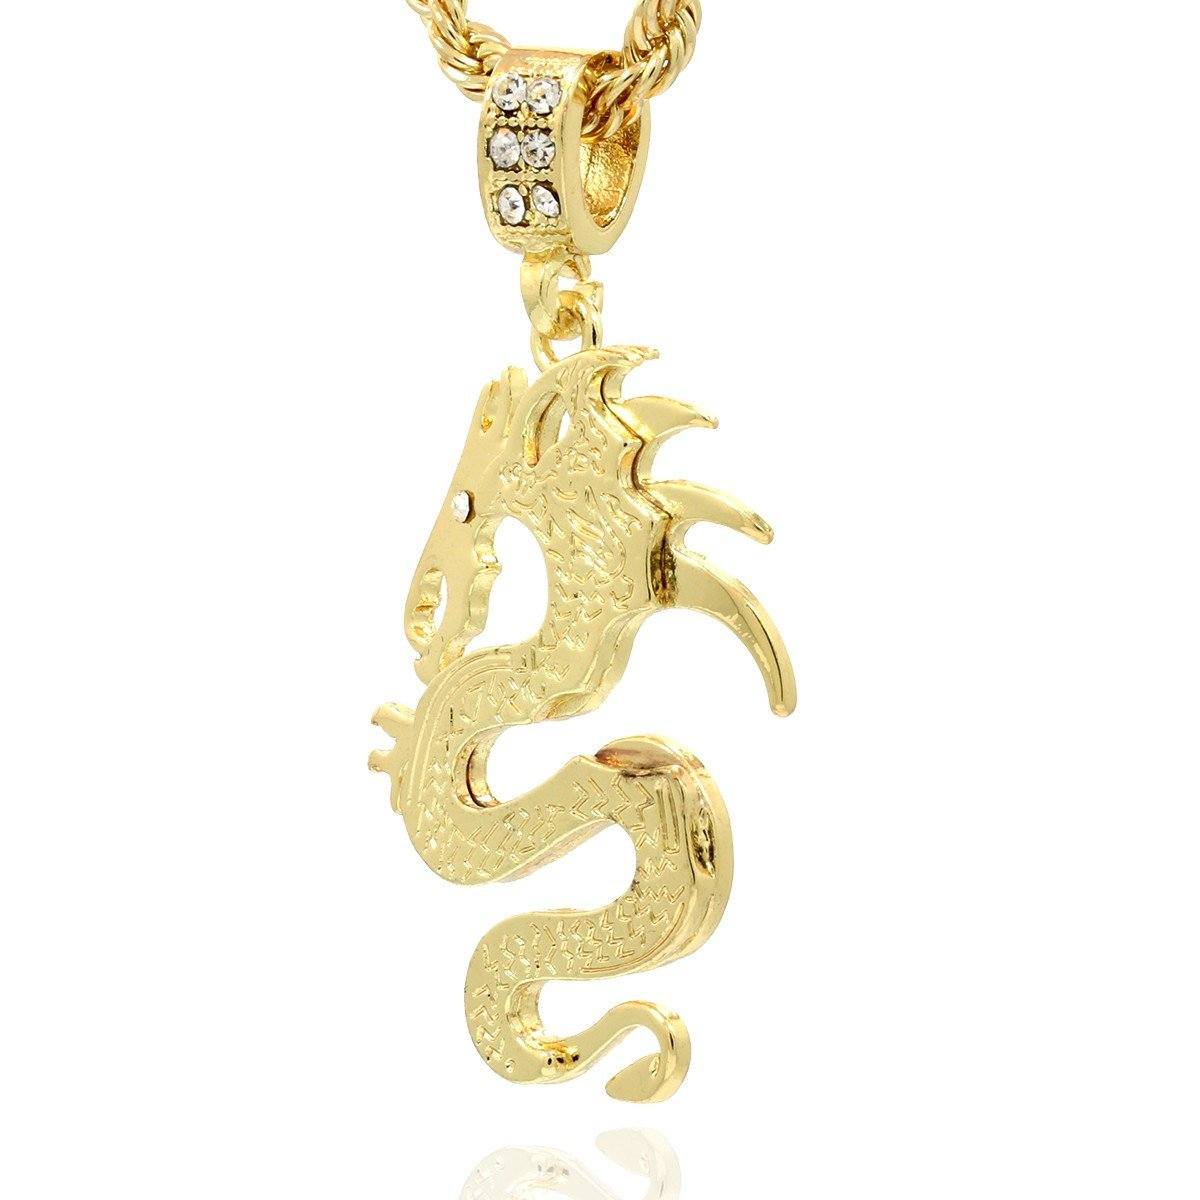 DRAGON PENDANT WITH GOLD ROPE CHAIN